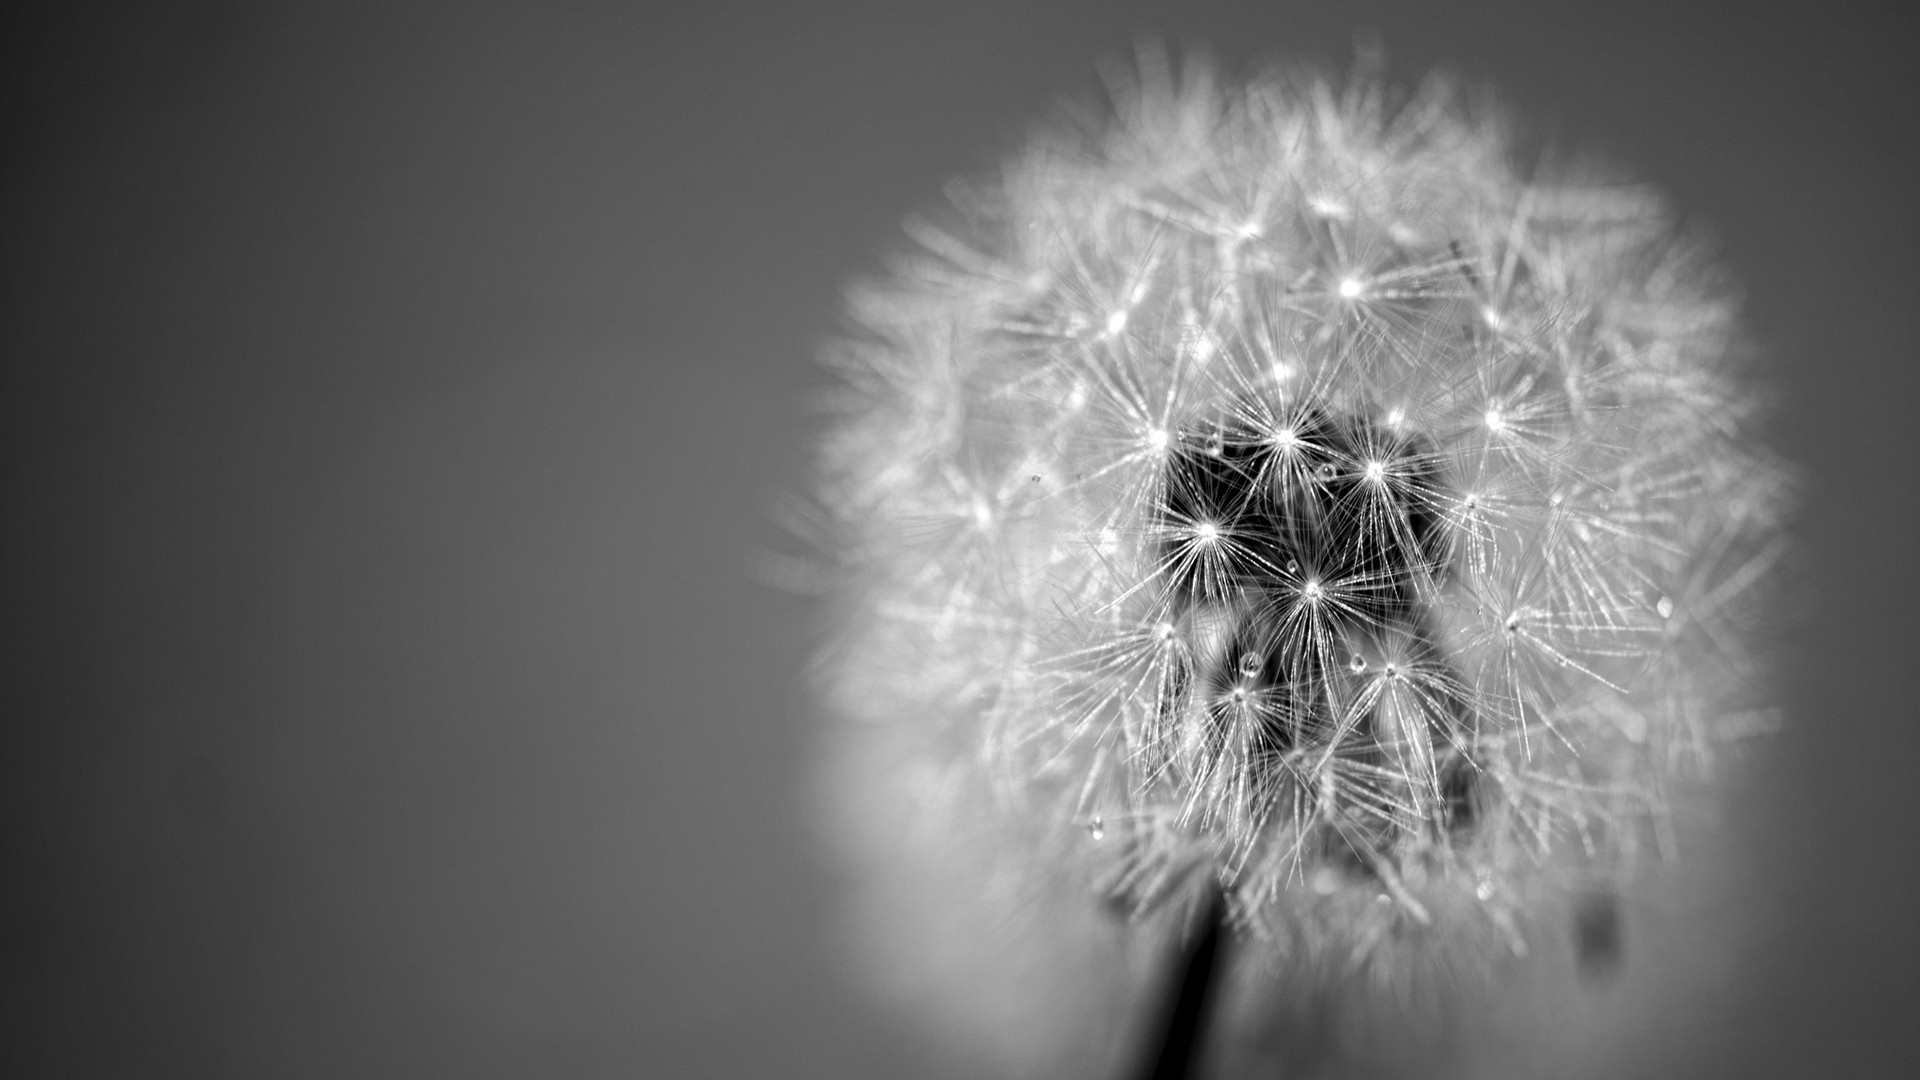 Dandelion, with effect black and white desktop background